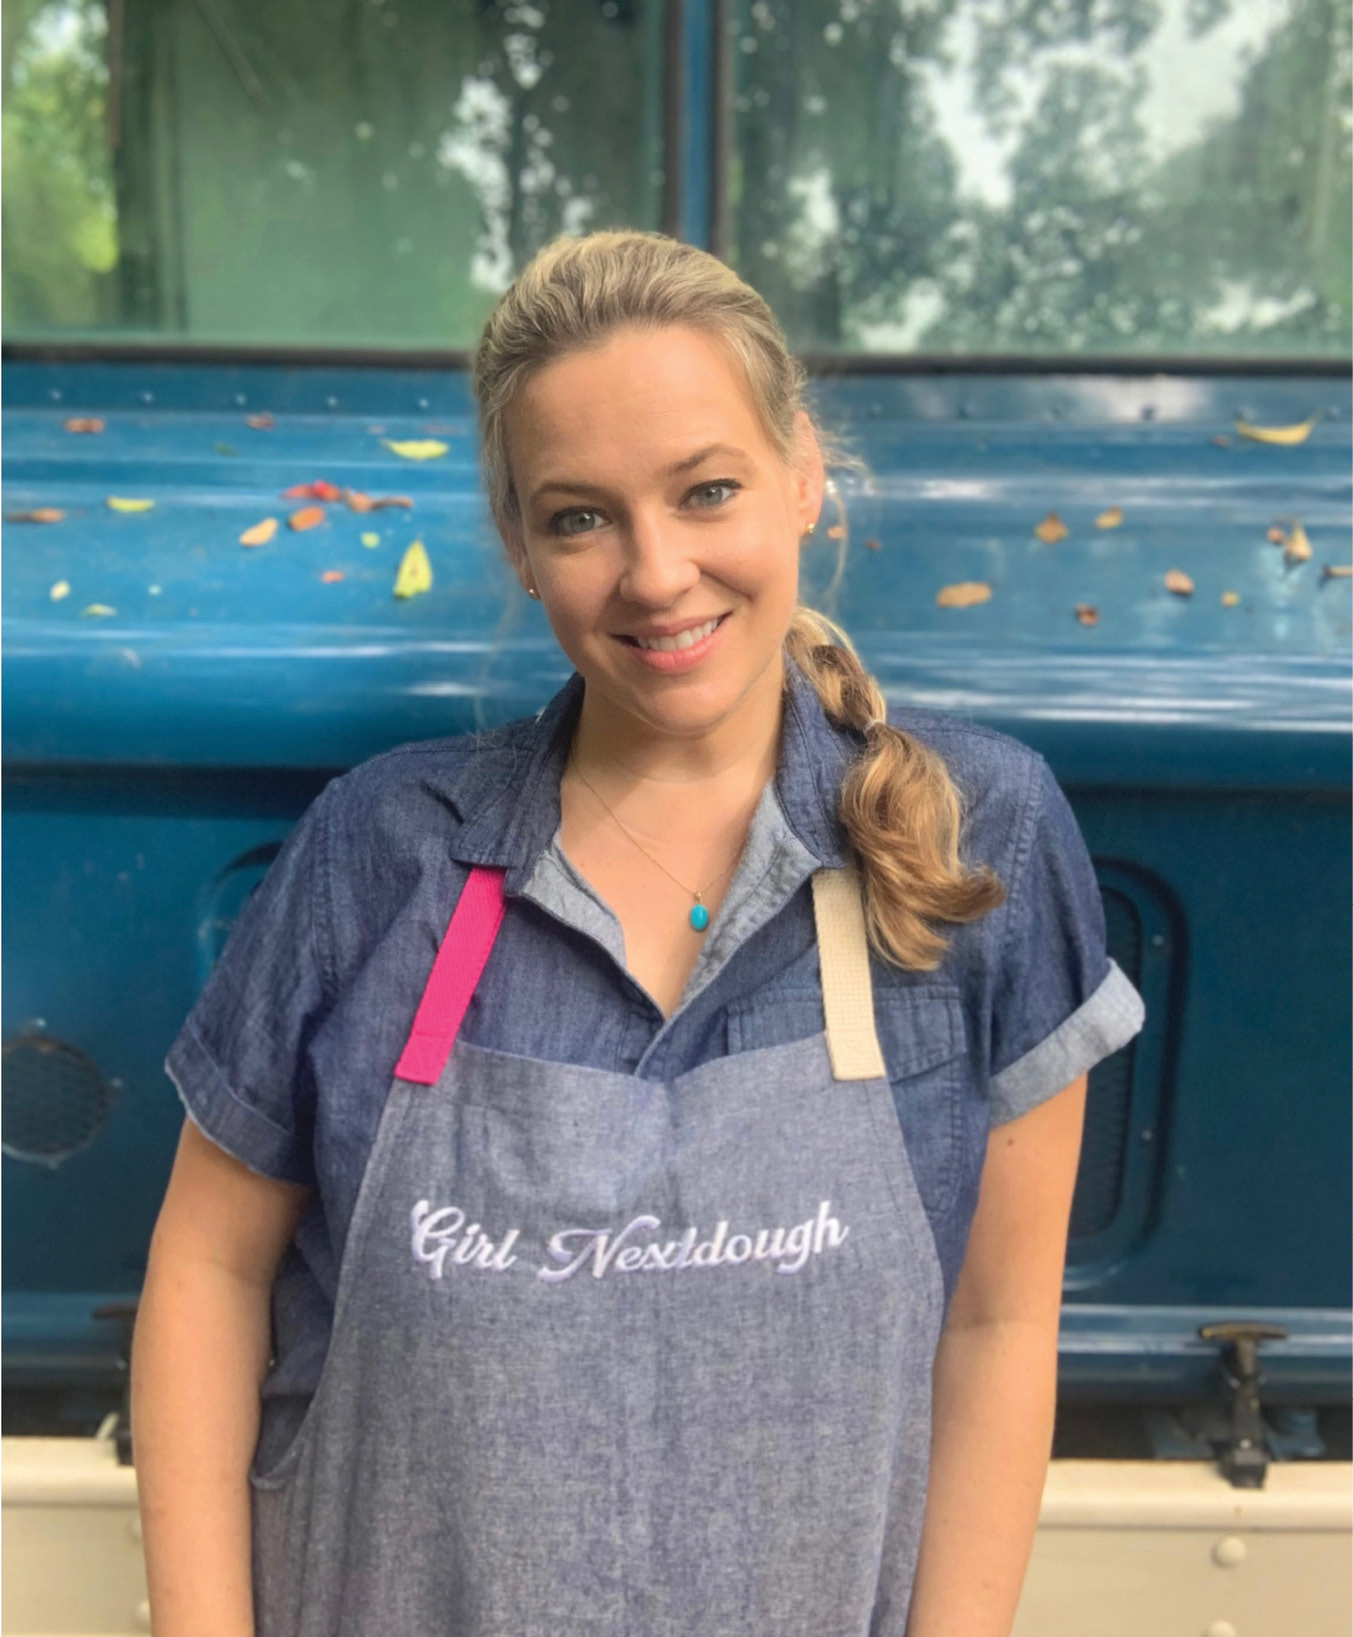 Girl Nextdough, a small batch baking food truck, can be found at 1230 Camp Road, Saturday and Sunday from 8 a.m. to noon (or until sold out).